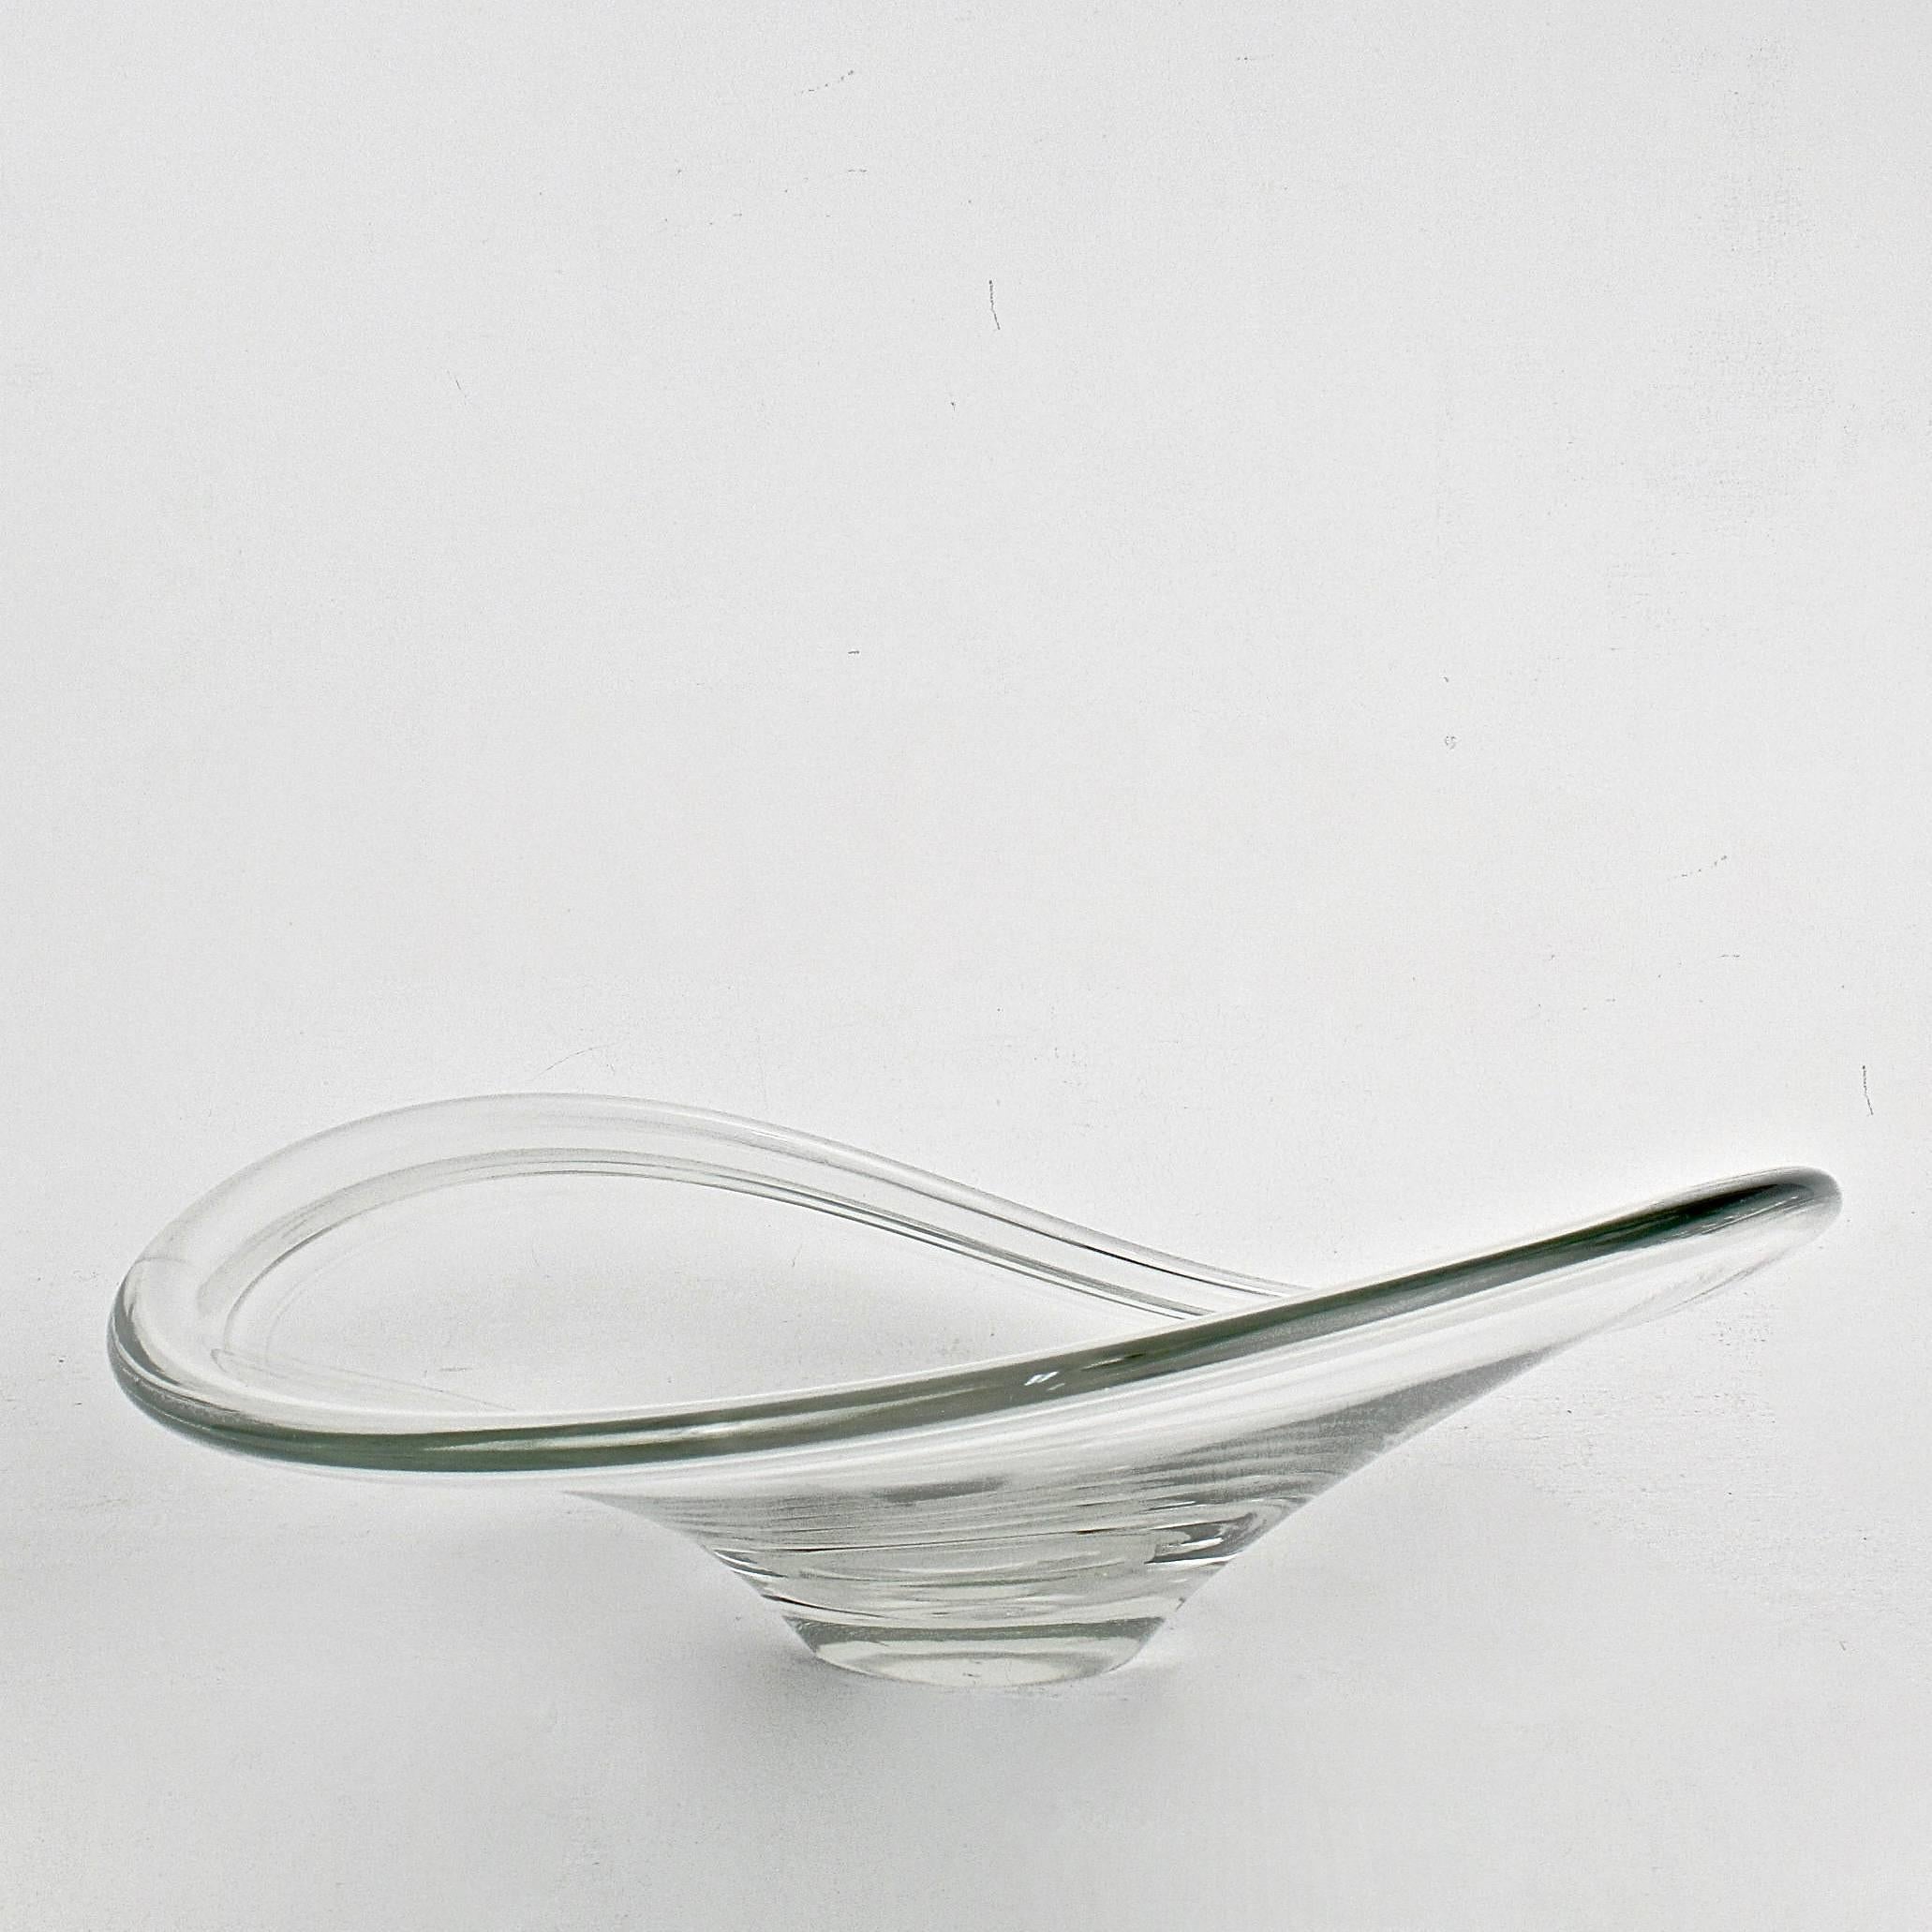 
An iconic Danish modern piece designed by Per Lutken for Holmegaard. 

A Selandia centerpiece bowl with a very slight grey tint in the glass. 

The bowl is marked on the base 19 PL 60 and Holmegaard.

Width: circa 15 1/2 in.

Items